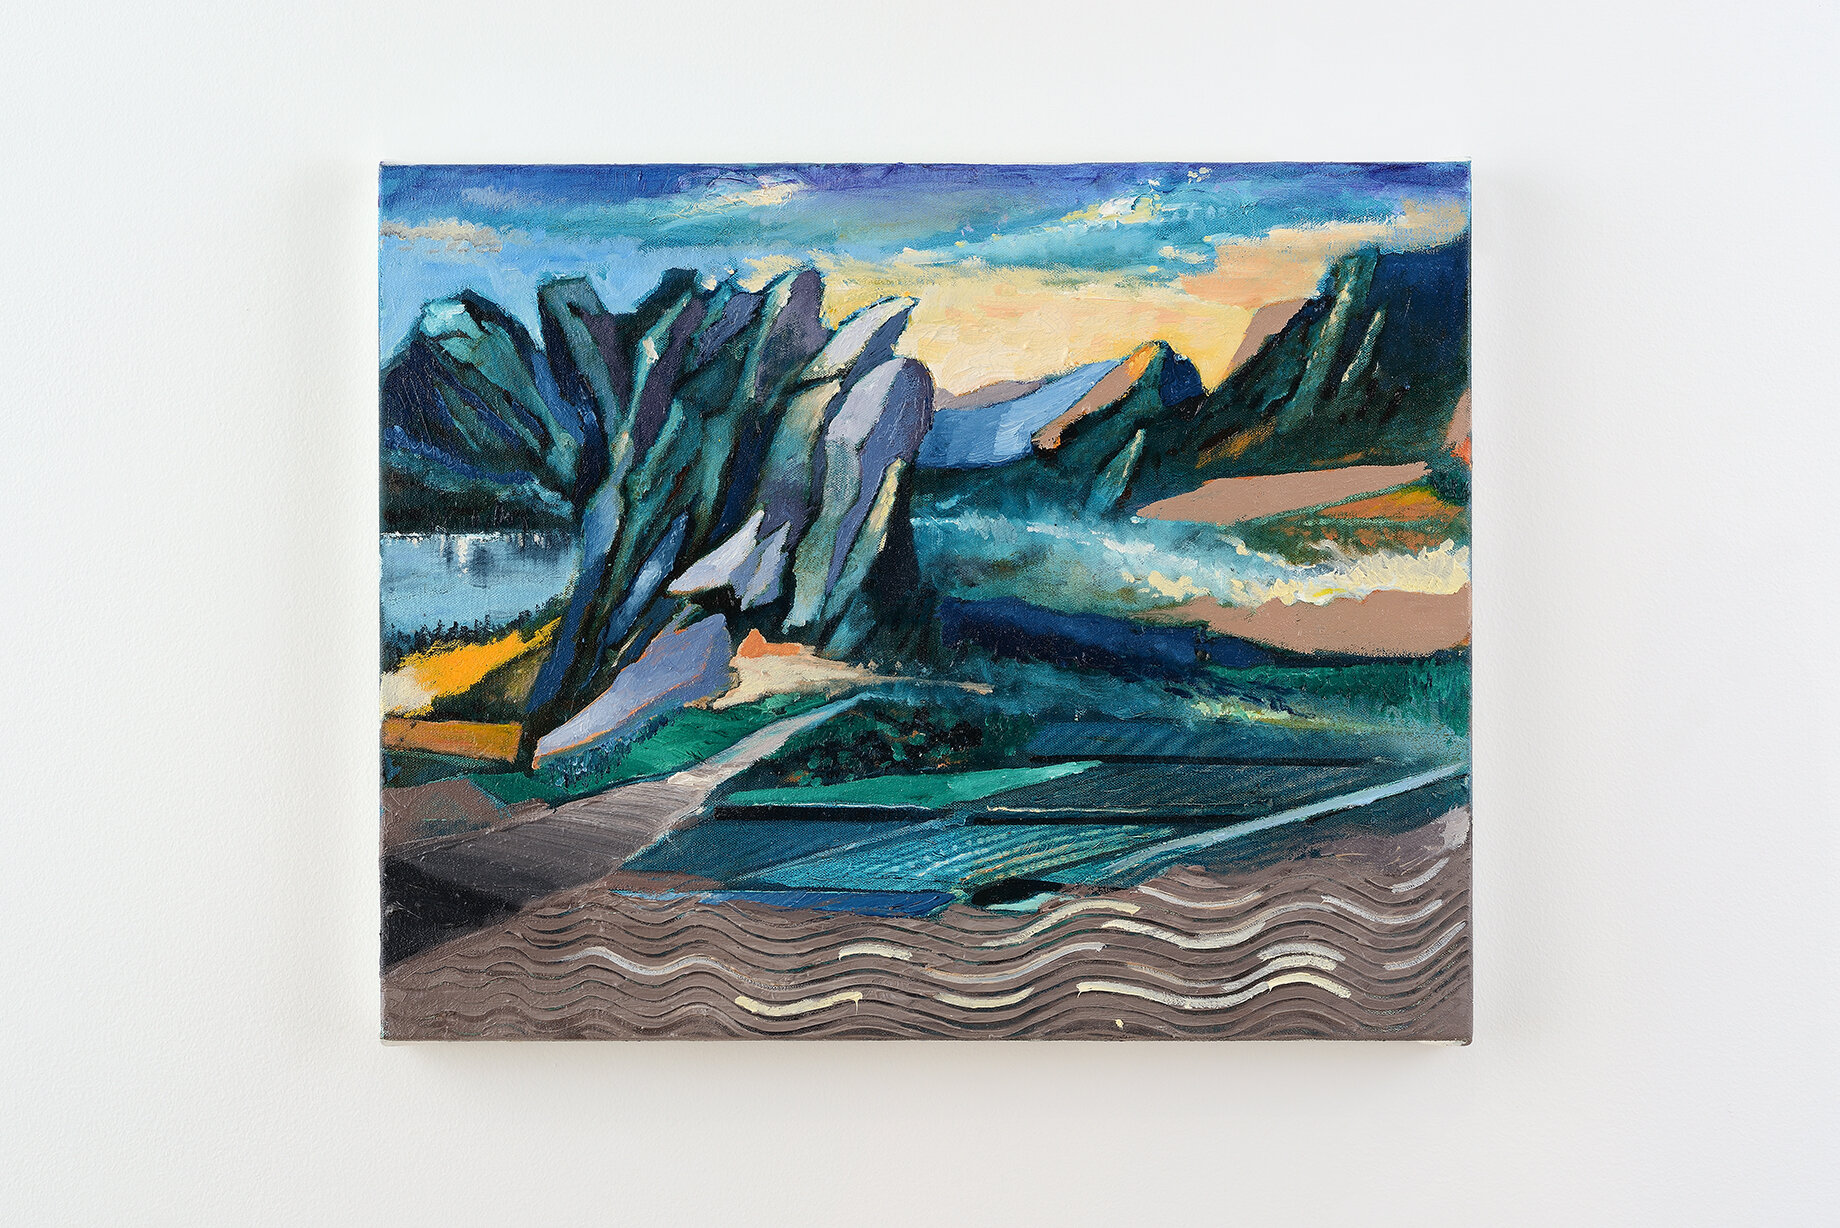   Valley  (2020),    oil on canvas, 50x40x3 cm       